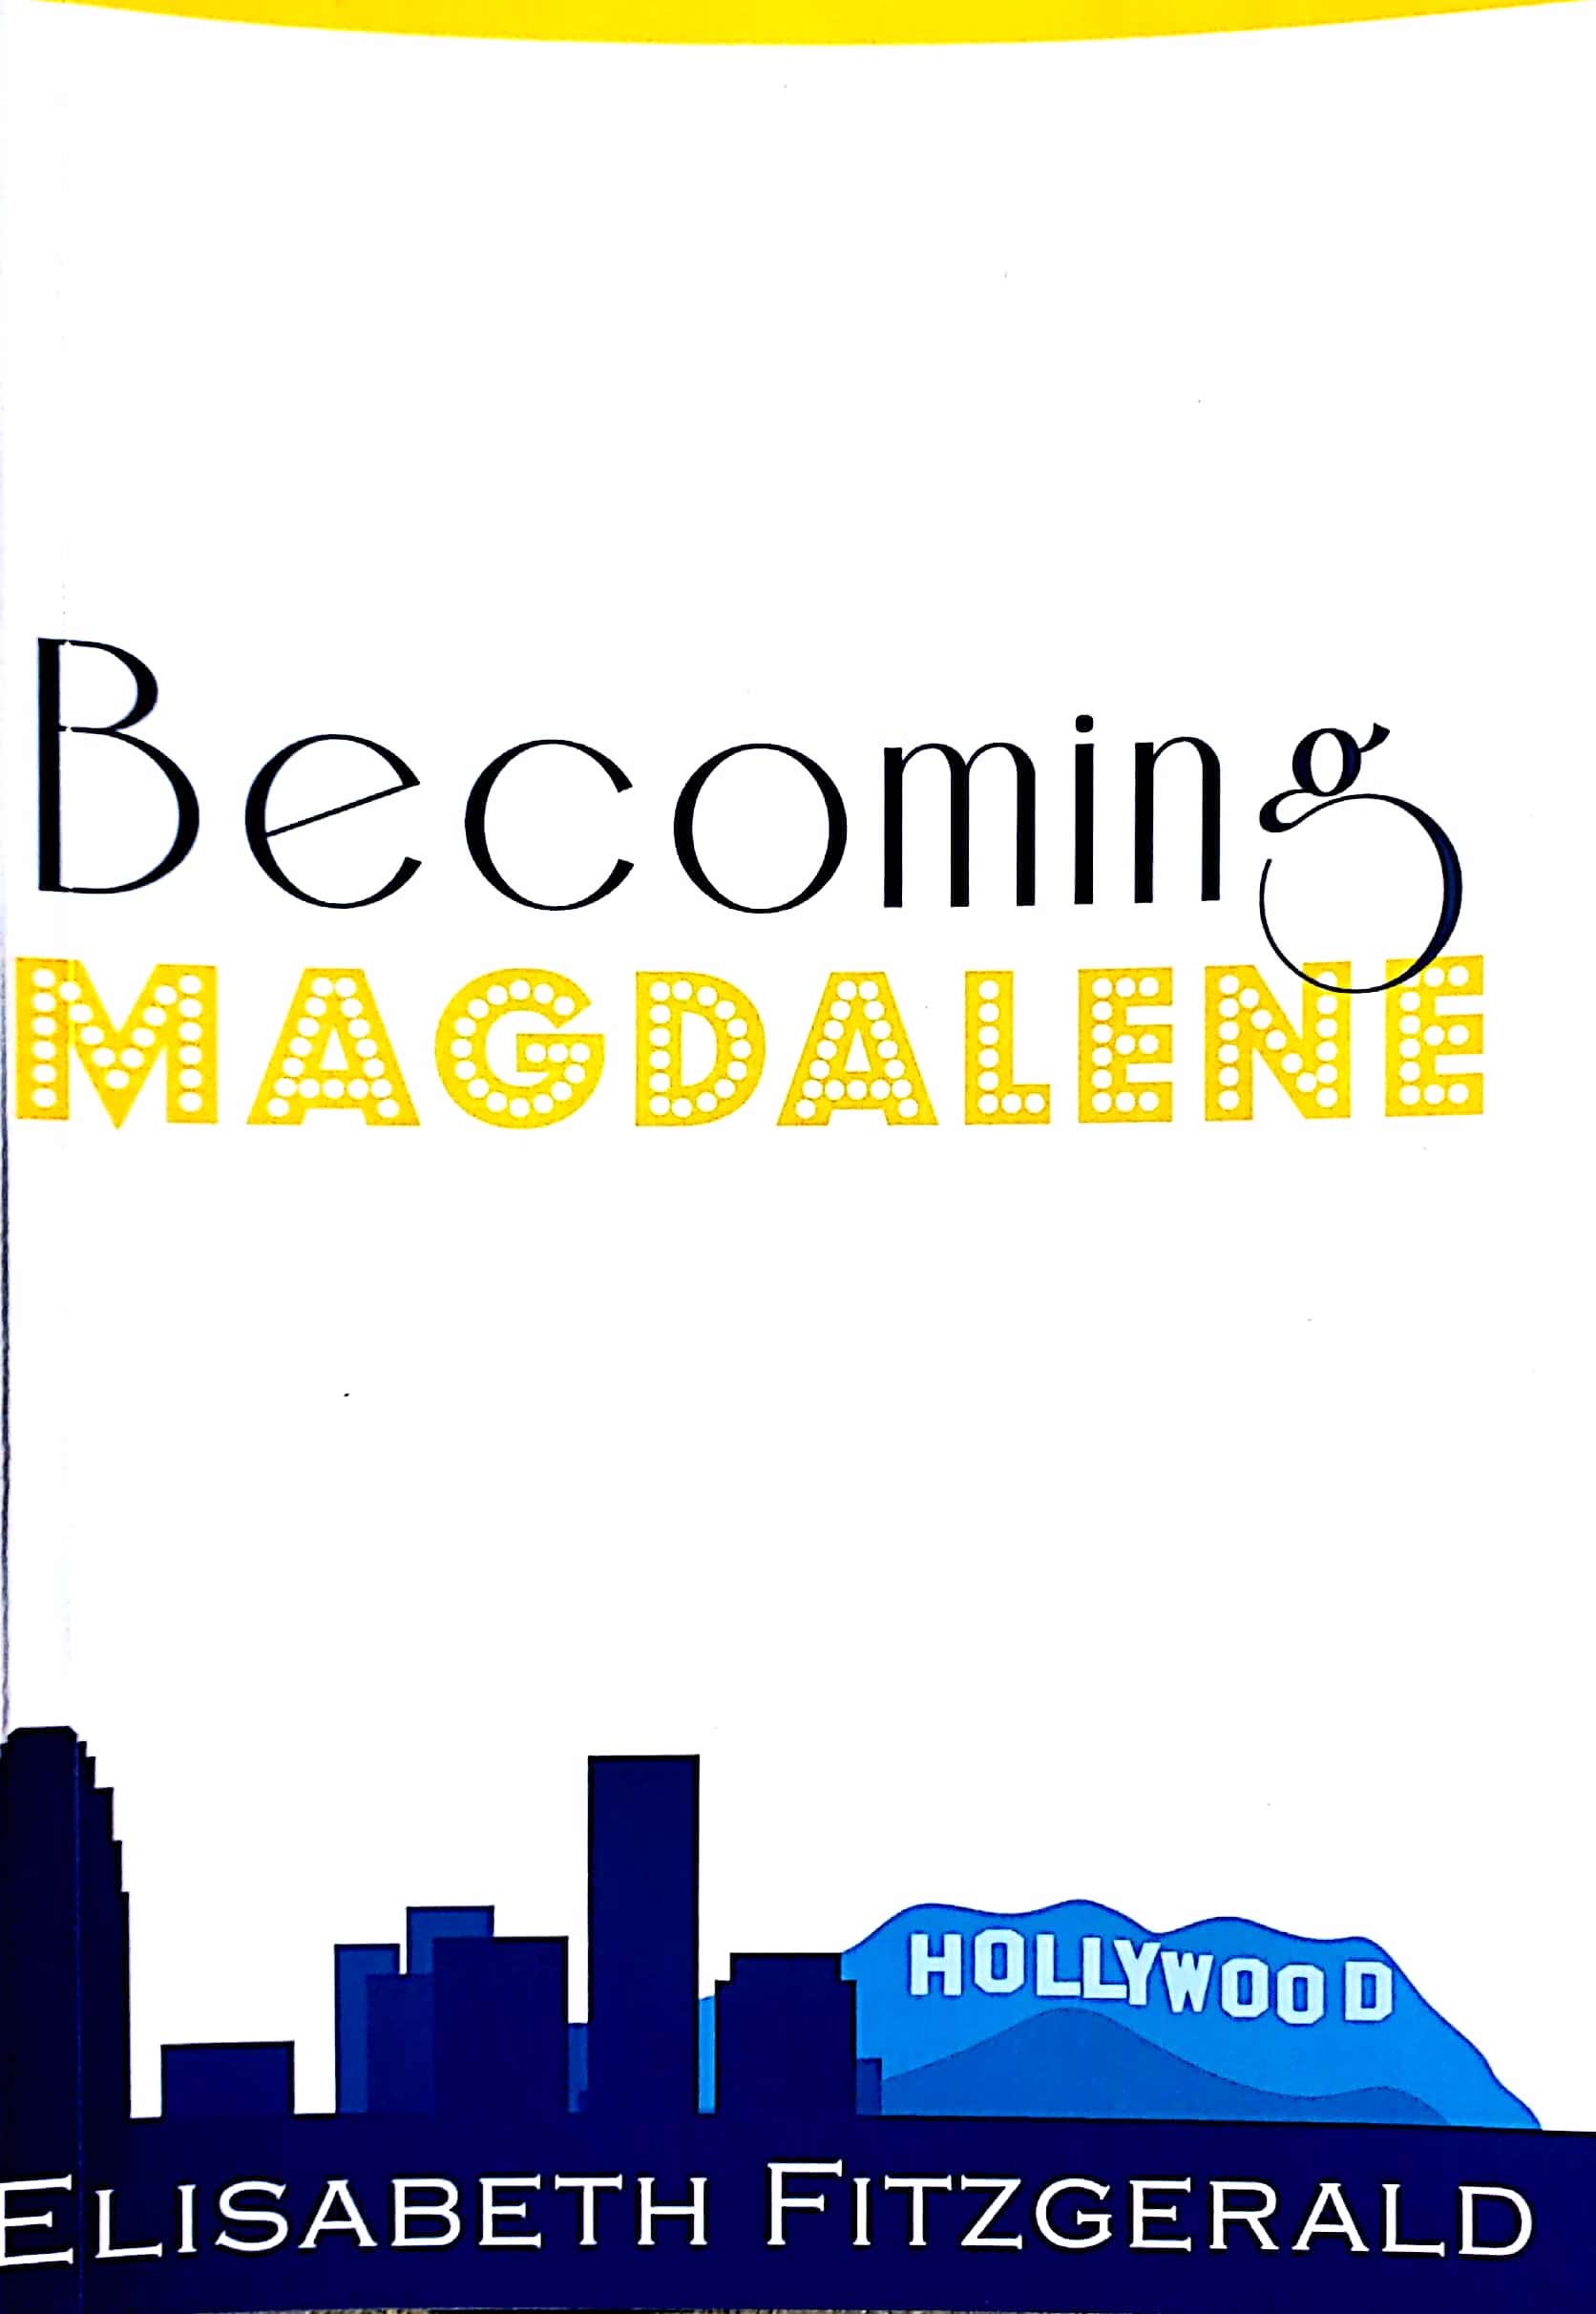 Engaging and witty, librarian’s novel “Becoming Magdalene” explores an identity in progress